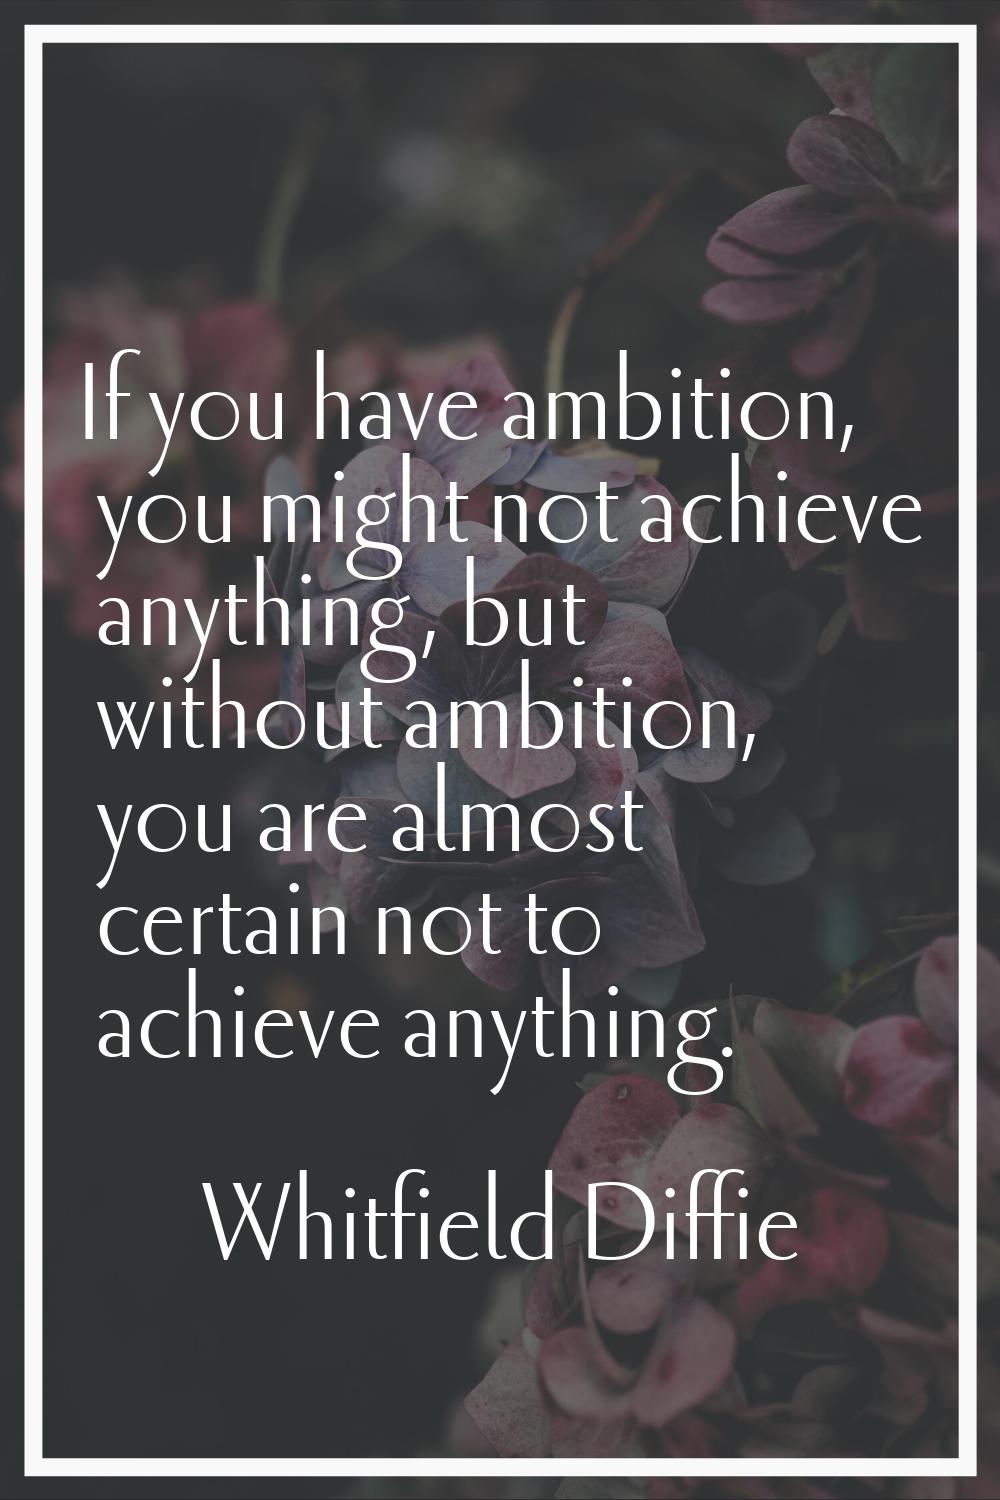 If you have ambition, you might not achieve anything, but without ambition, you are almost certain 